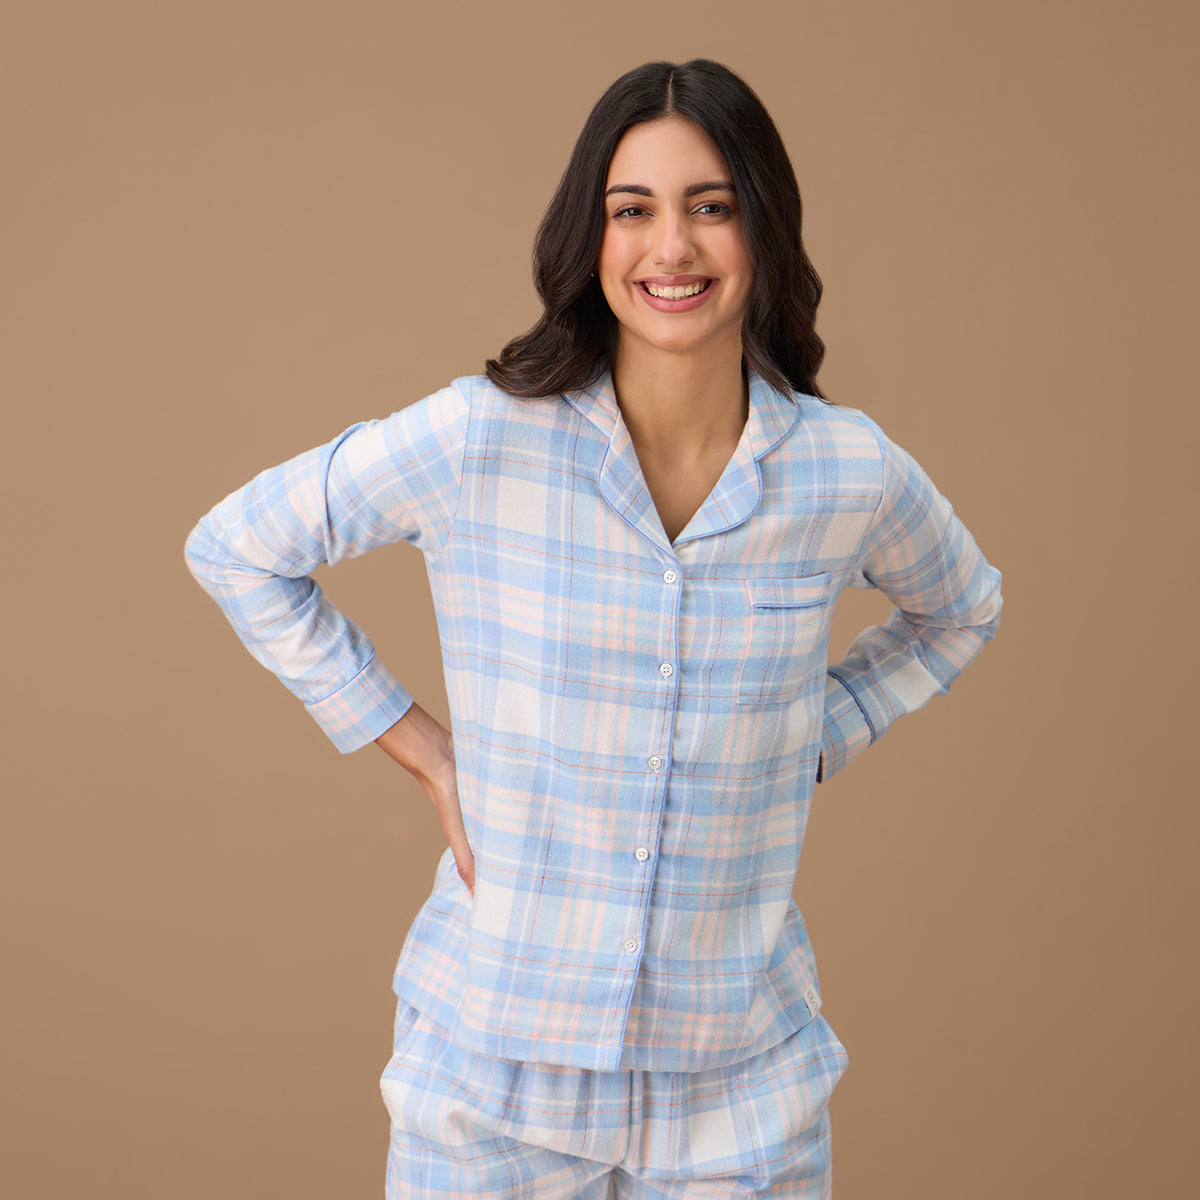 Nykd By Nykaa Button Down Cotton Flannel Pajama Set - NYS902 - Blue Pink Plaid